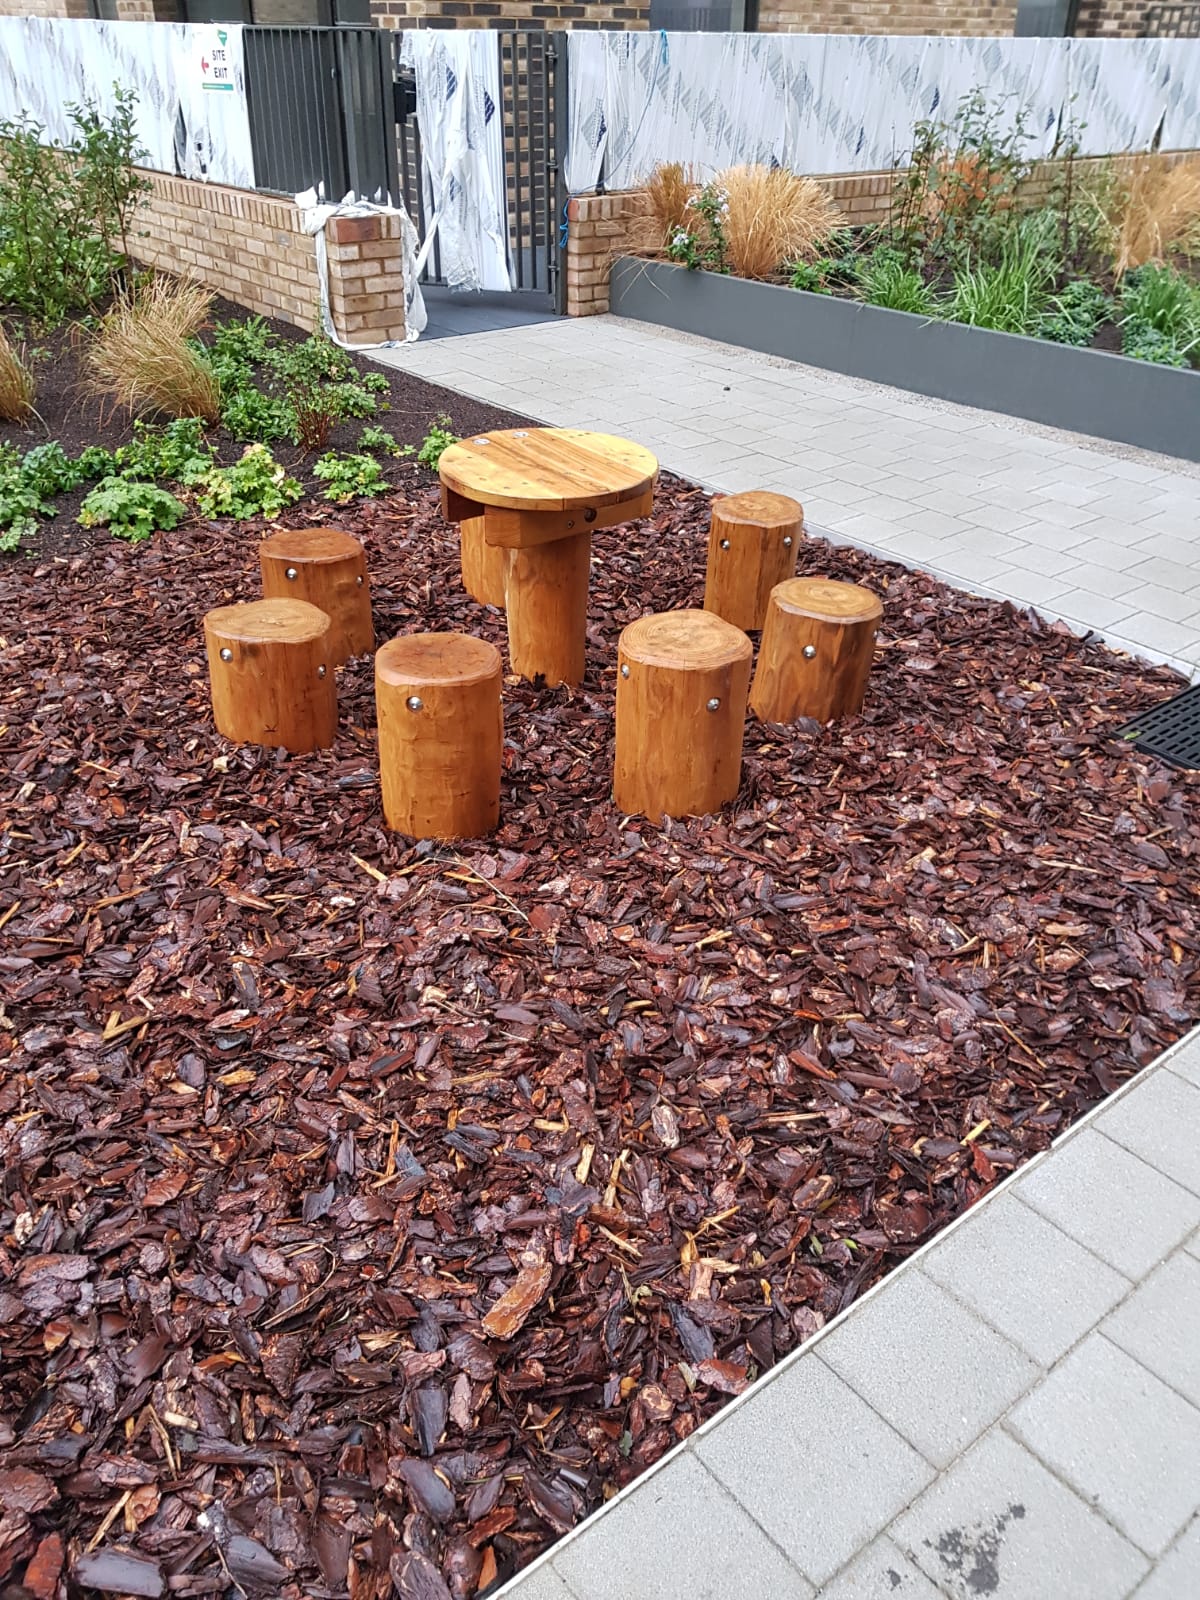 Seating area in bark